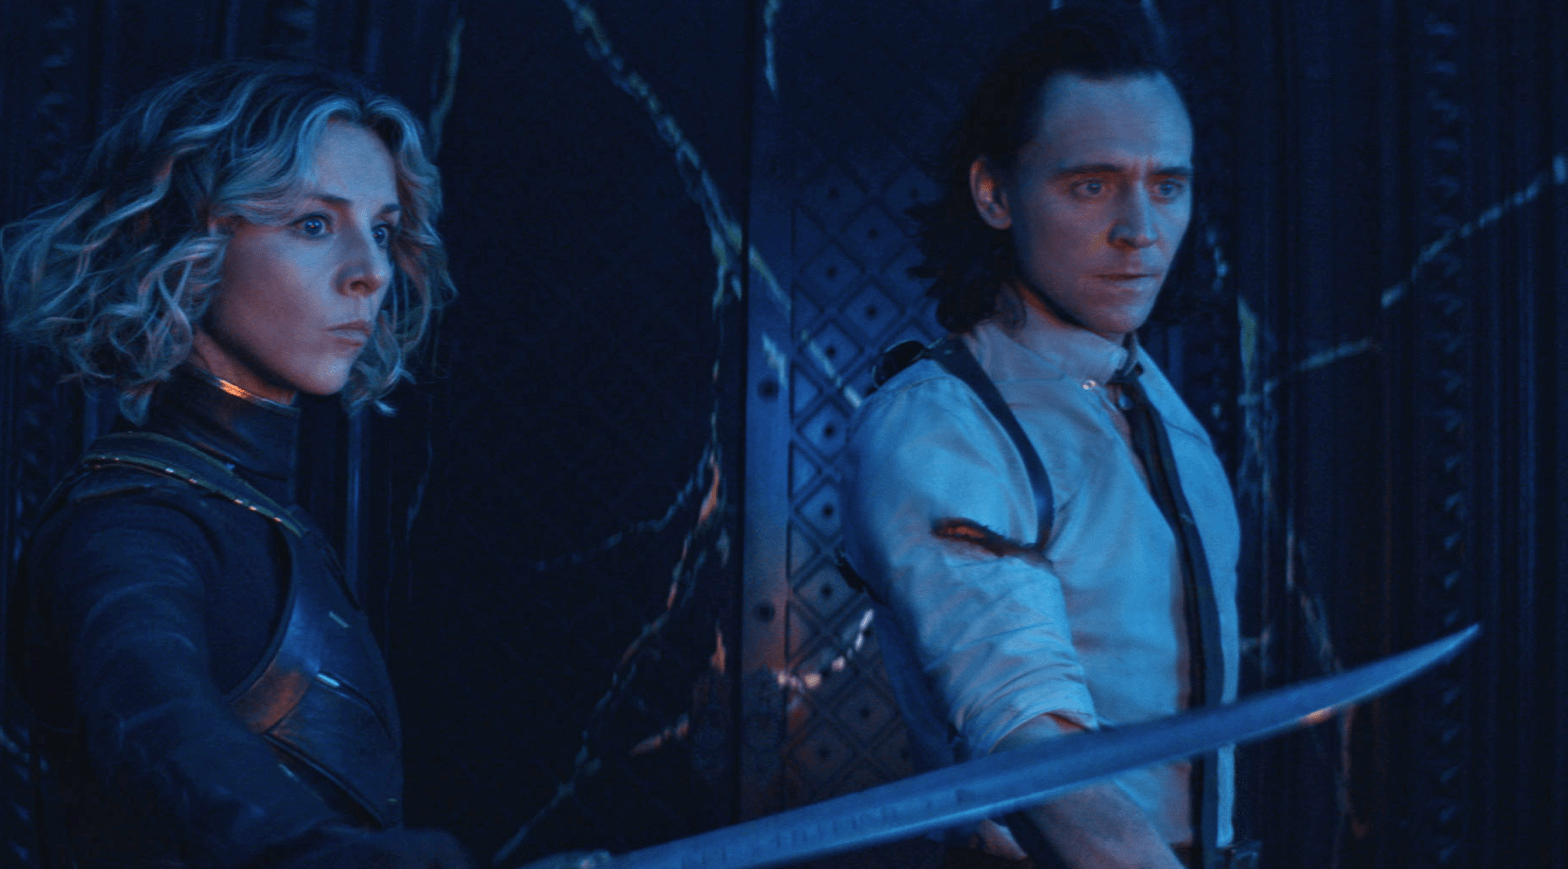 Sylvie and Loki confront their unlikely animus. (Image: Marvel Studios)